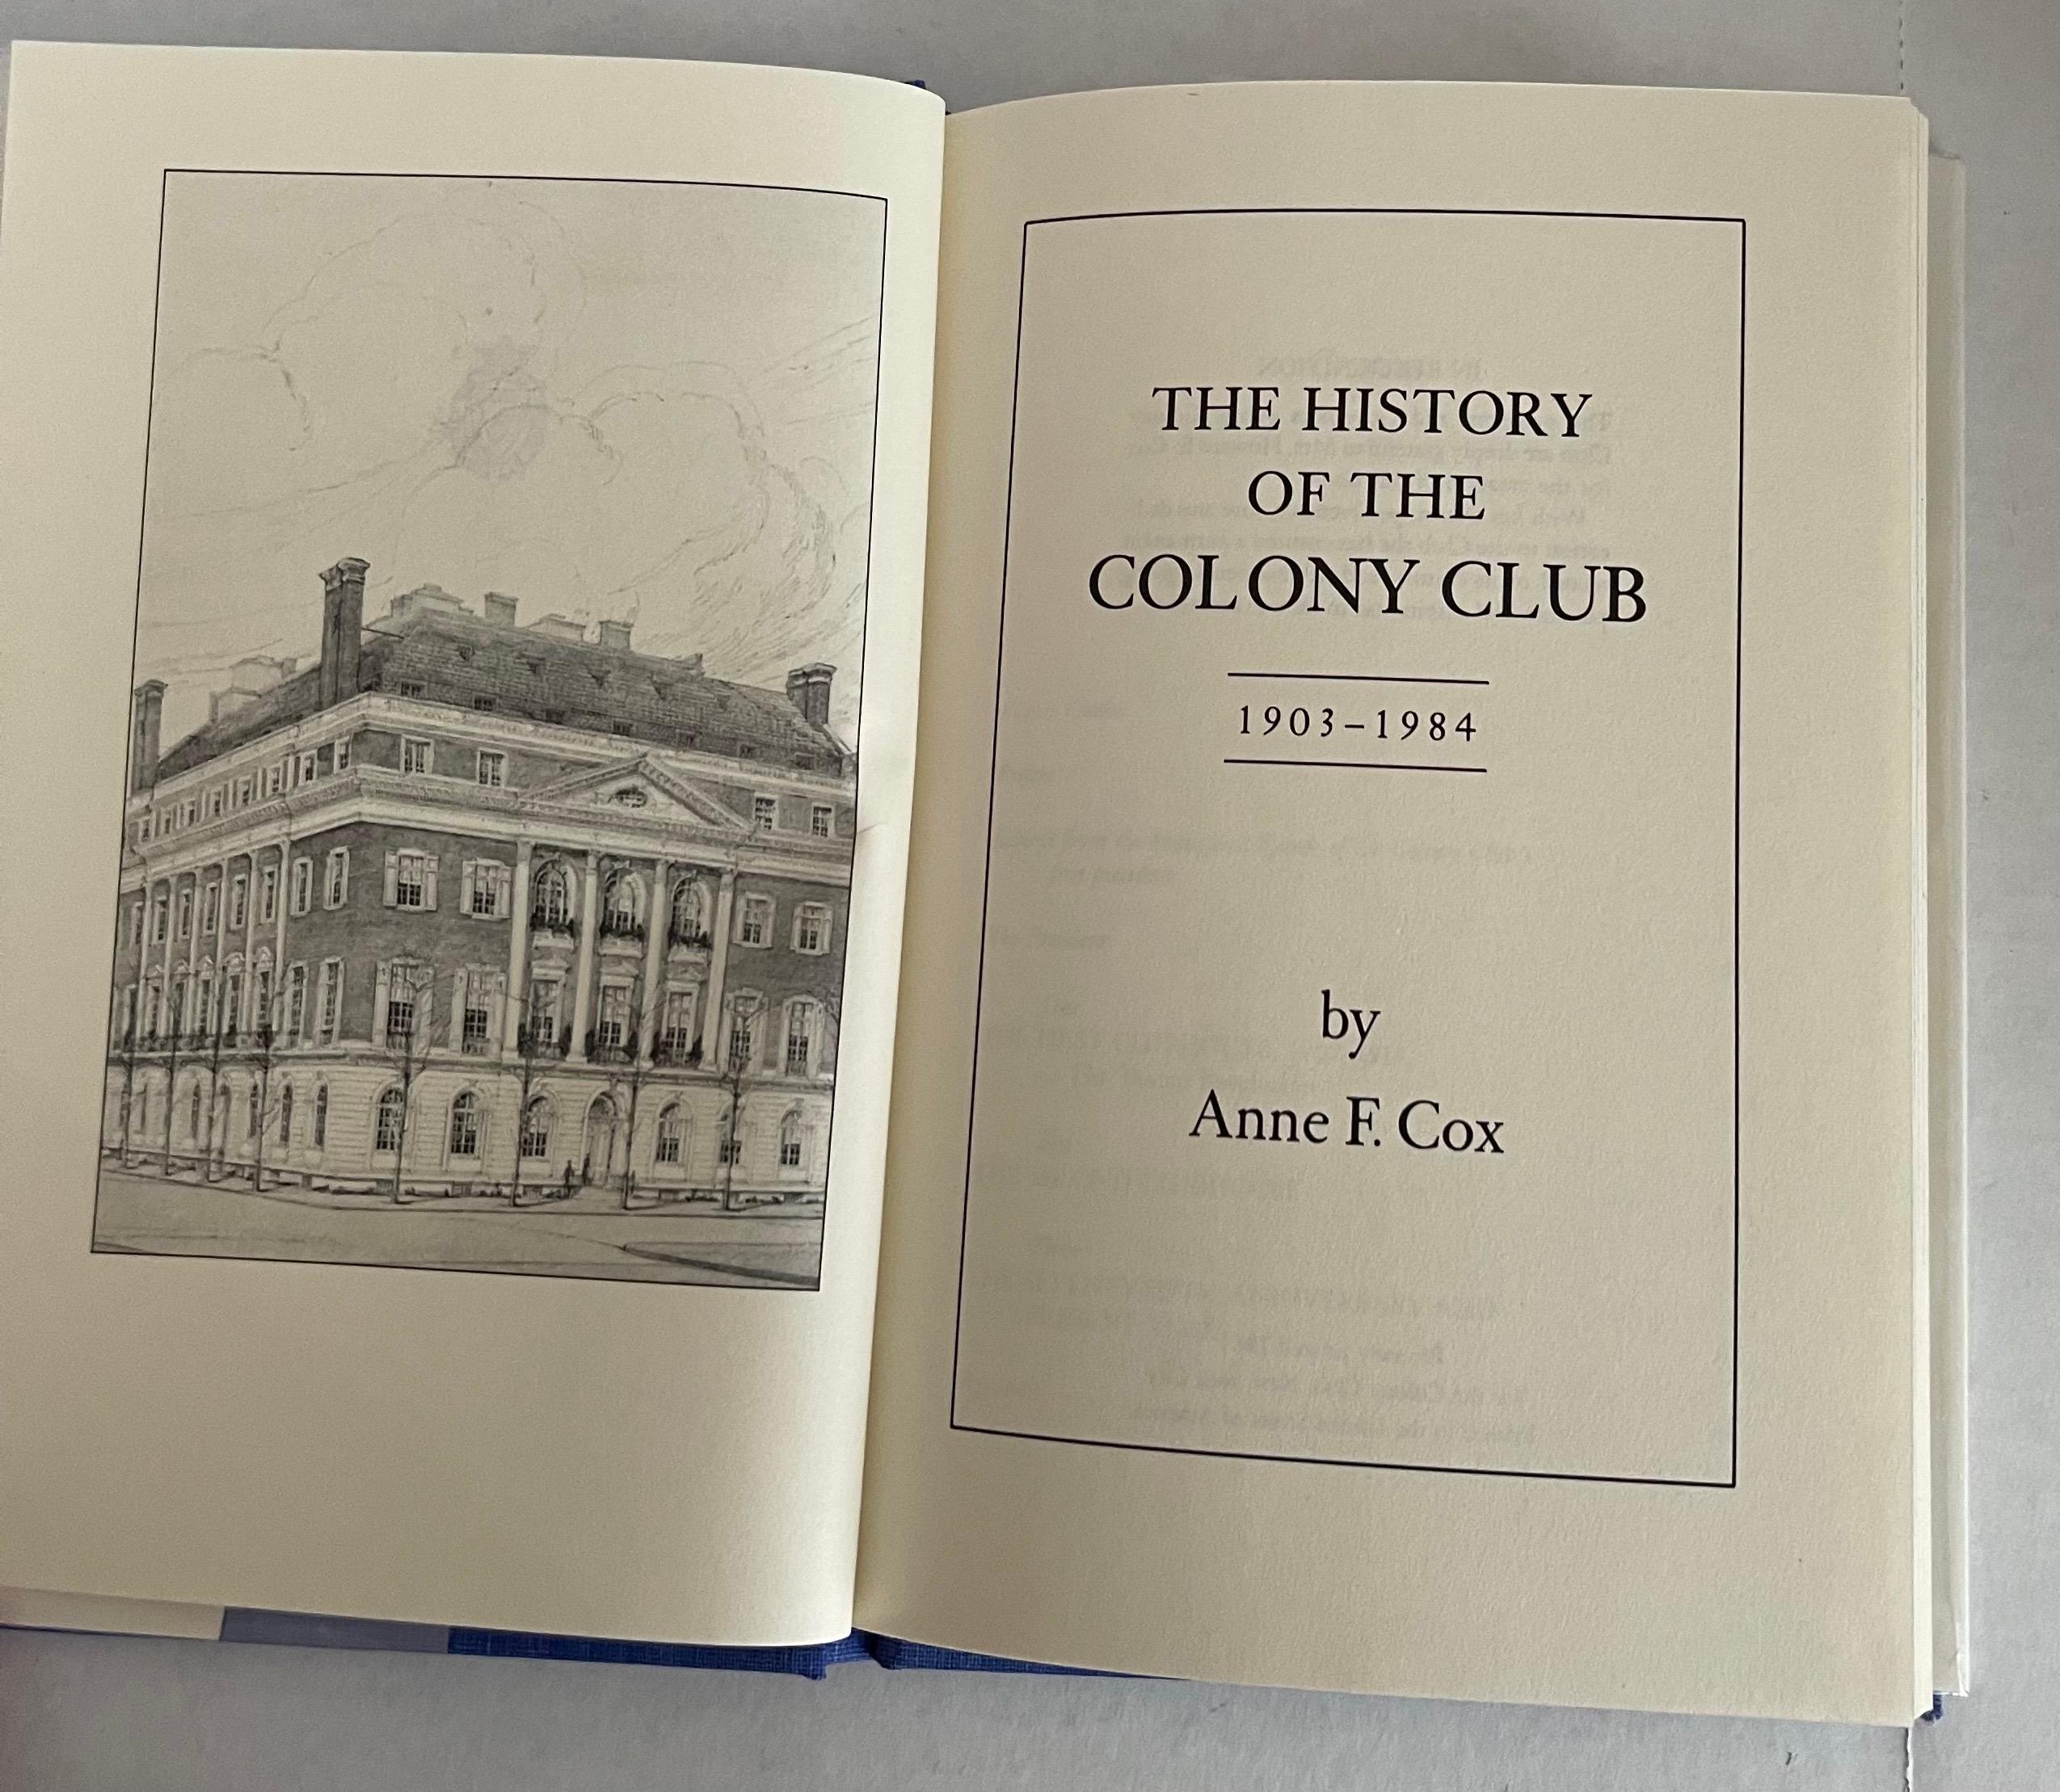 The History of the Colony Club by Ann F. Cox. Hardcover, 1st edition. 1984. Privately printed by the club. 
The Colony Club is a women-only private social club in New York City.